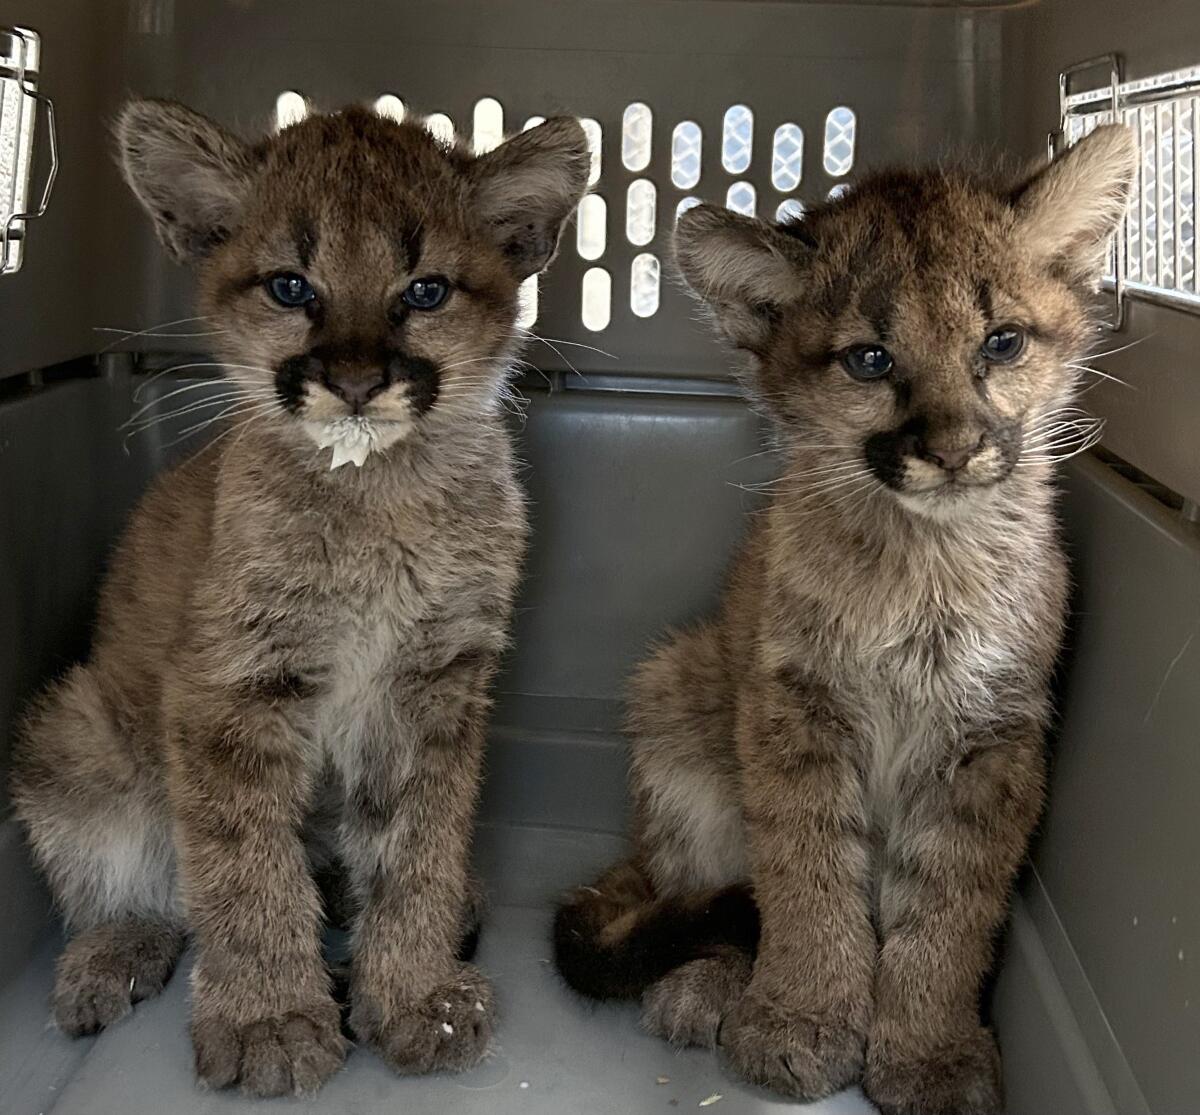 Two mountain lion cubs in a carrier.